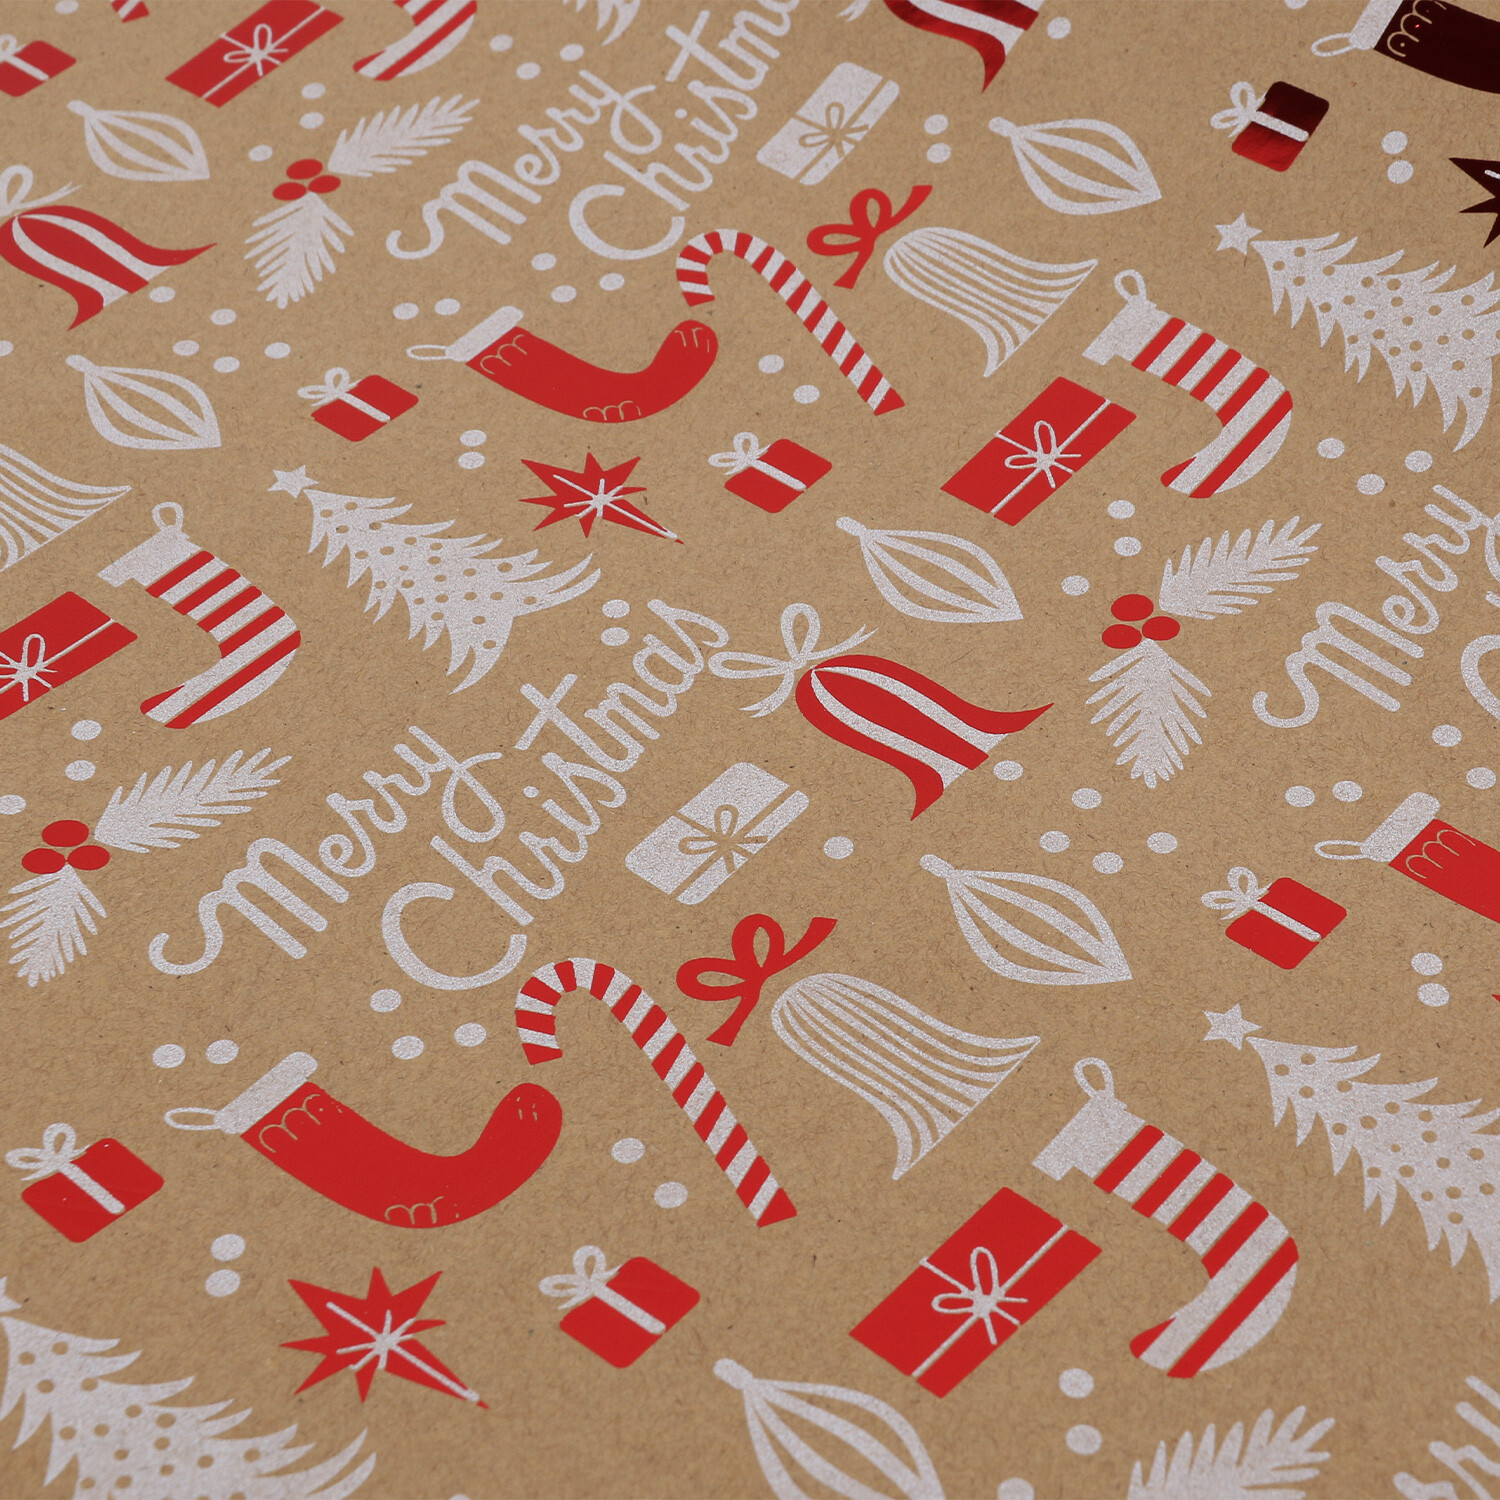 Kraft Foiled Wrapping Paper 8m - Brown Image 1